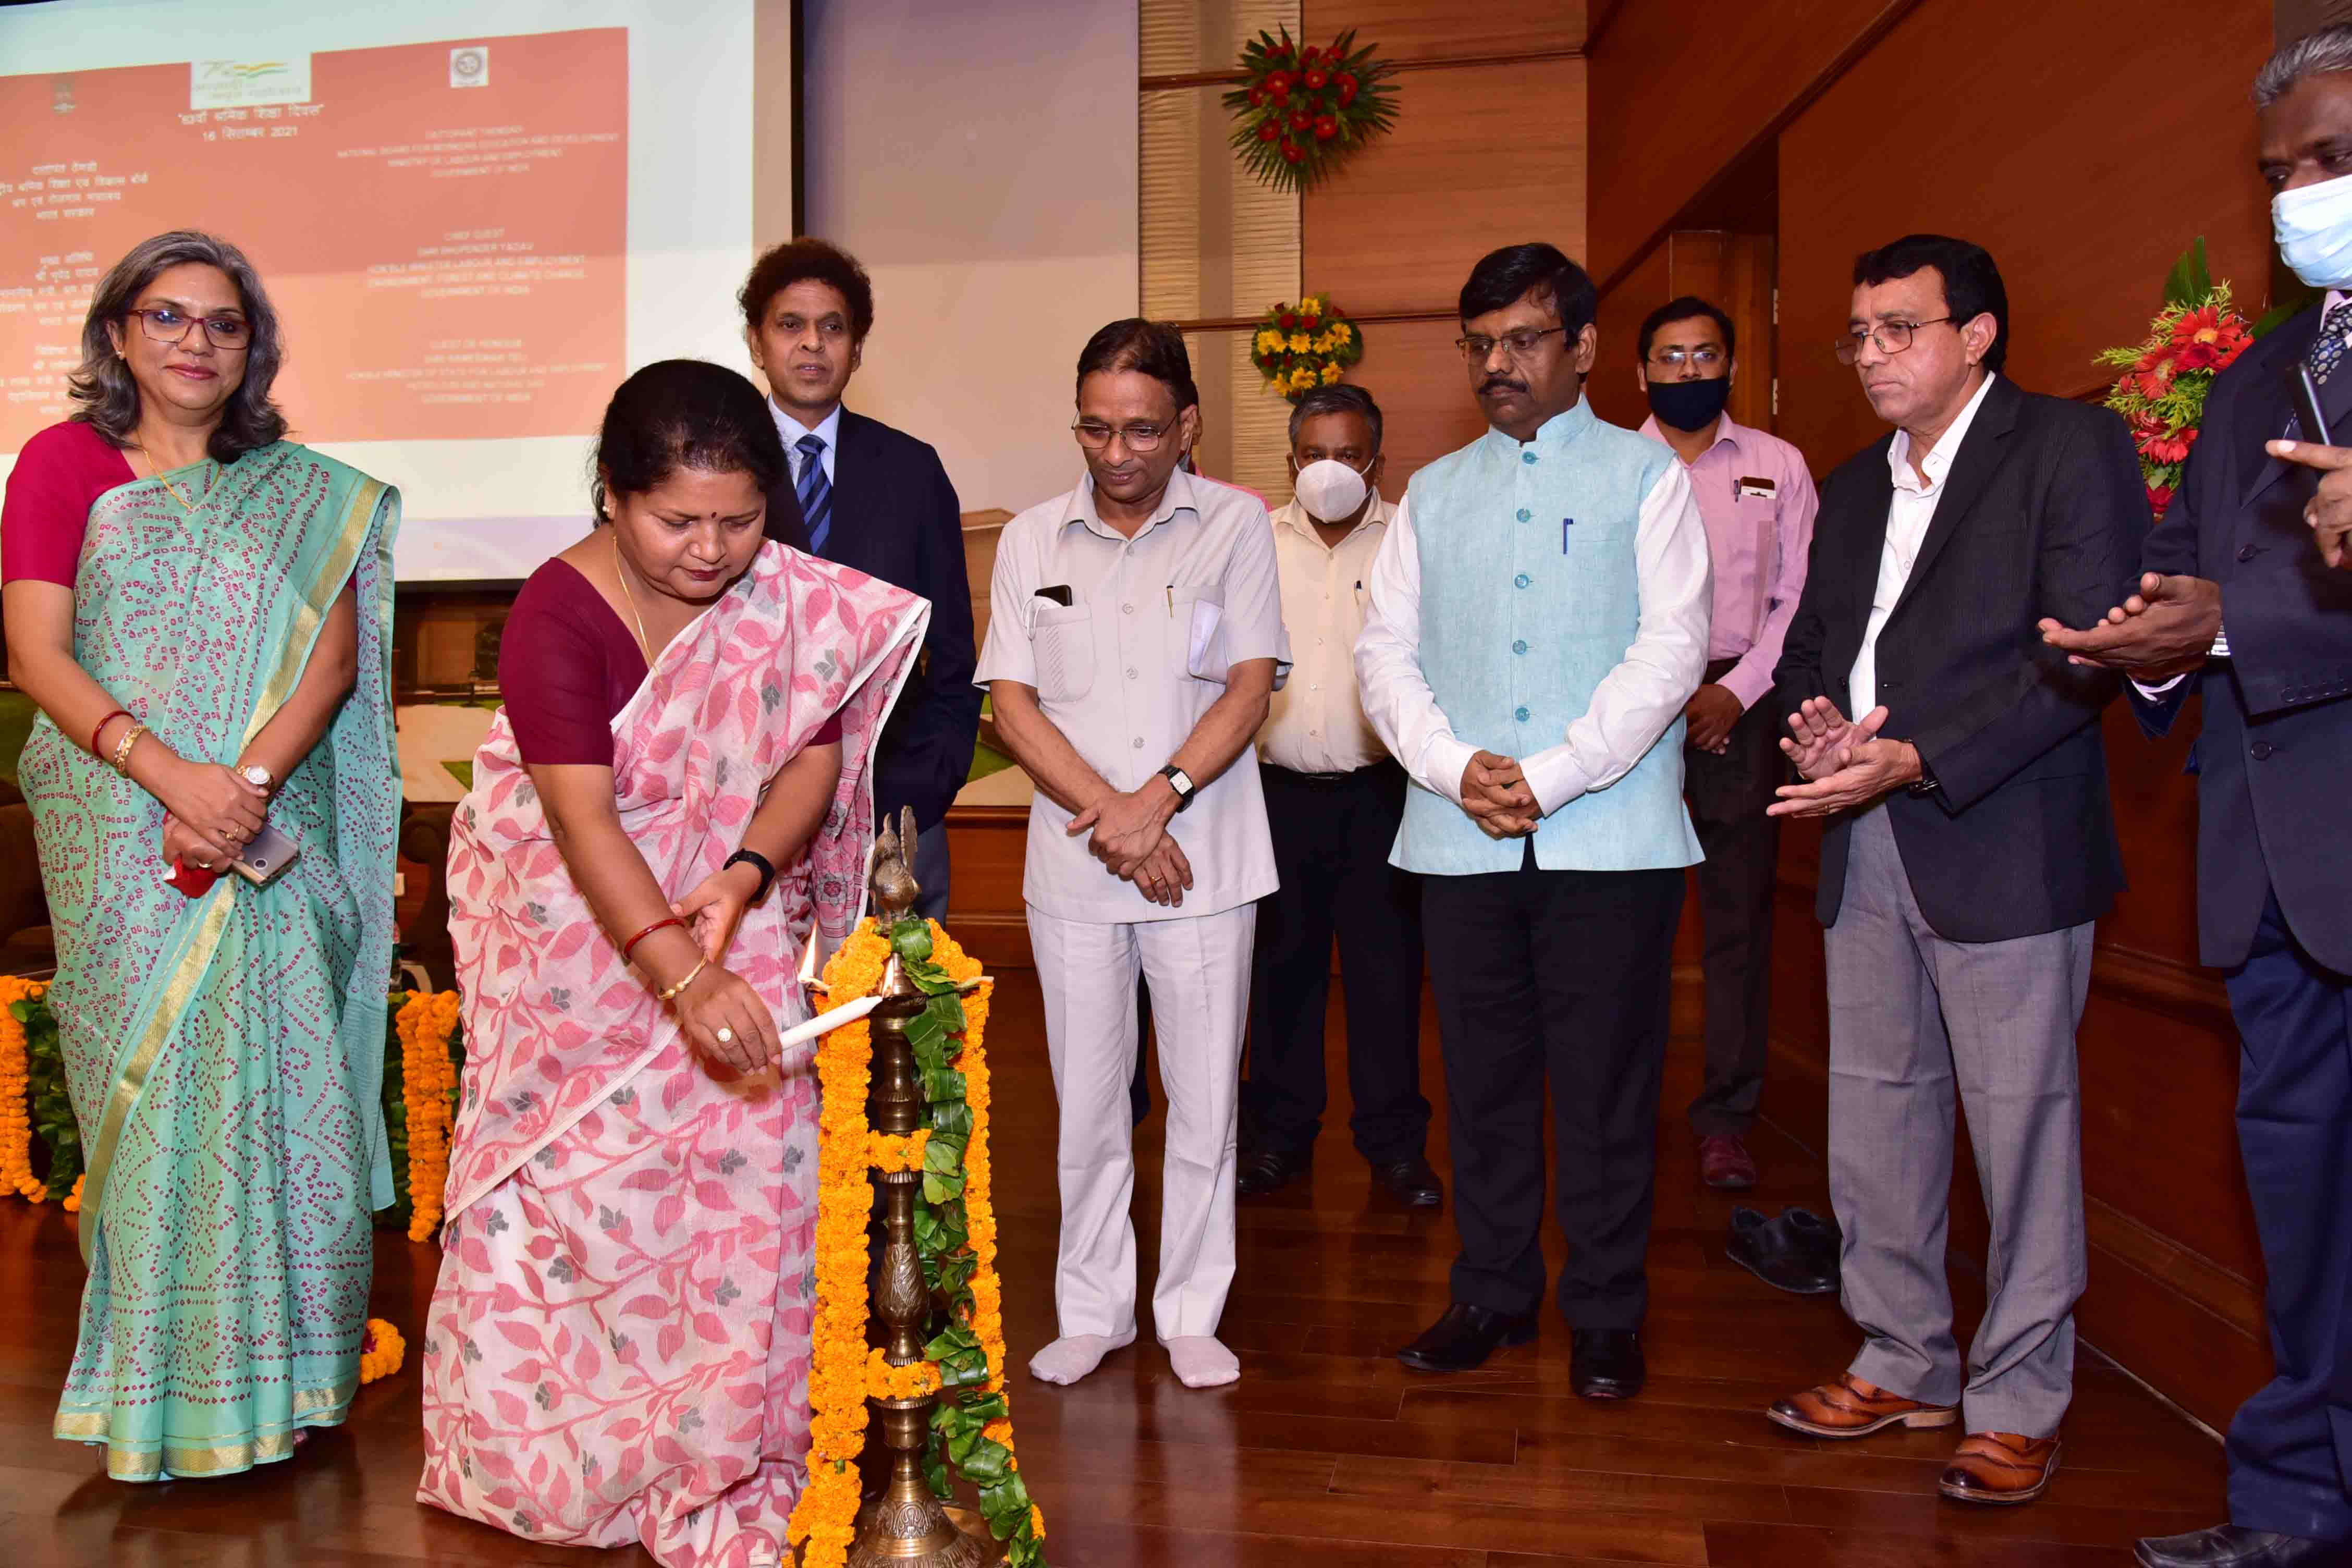 
<p>Glimpses of Celebration of Workers Education Day on 16th September, 2021 at New Delhi</p>
 